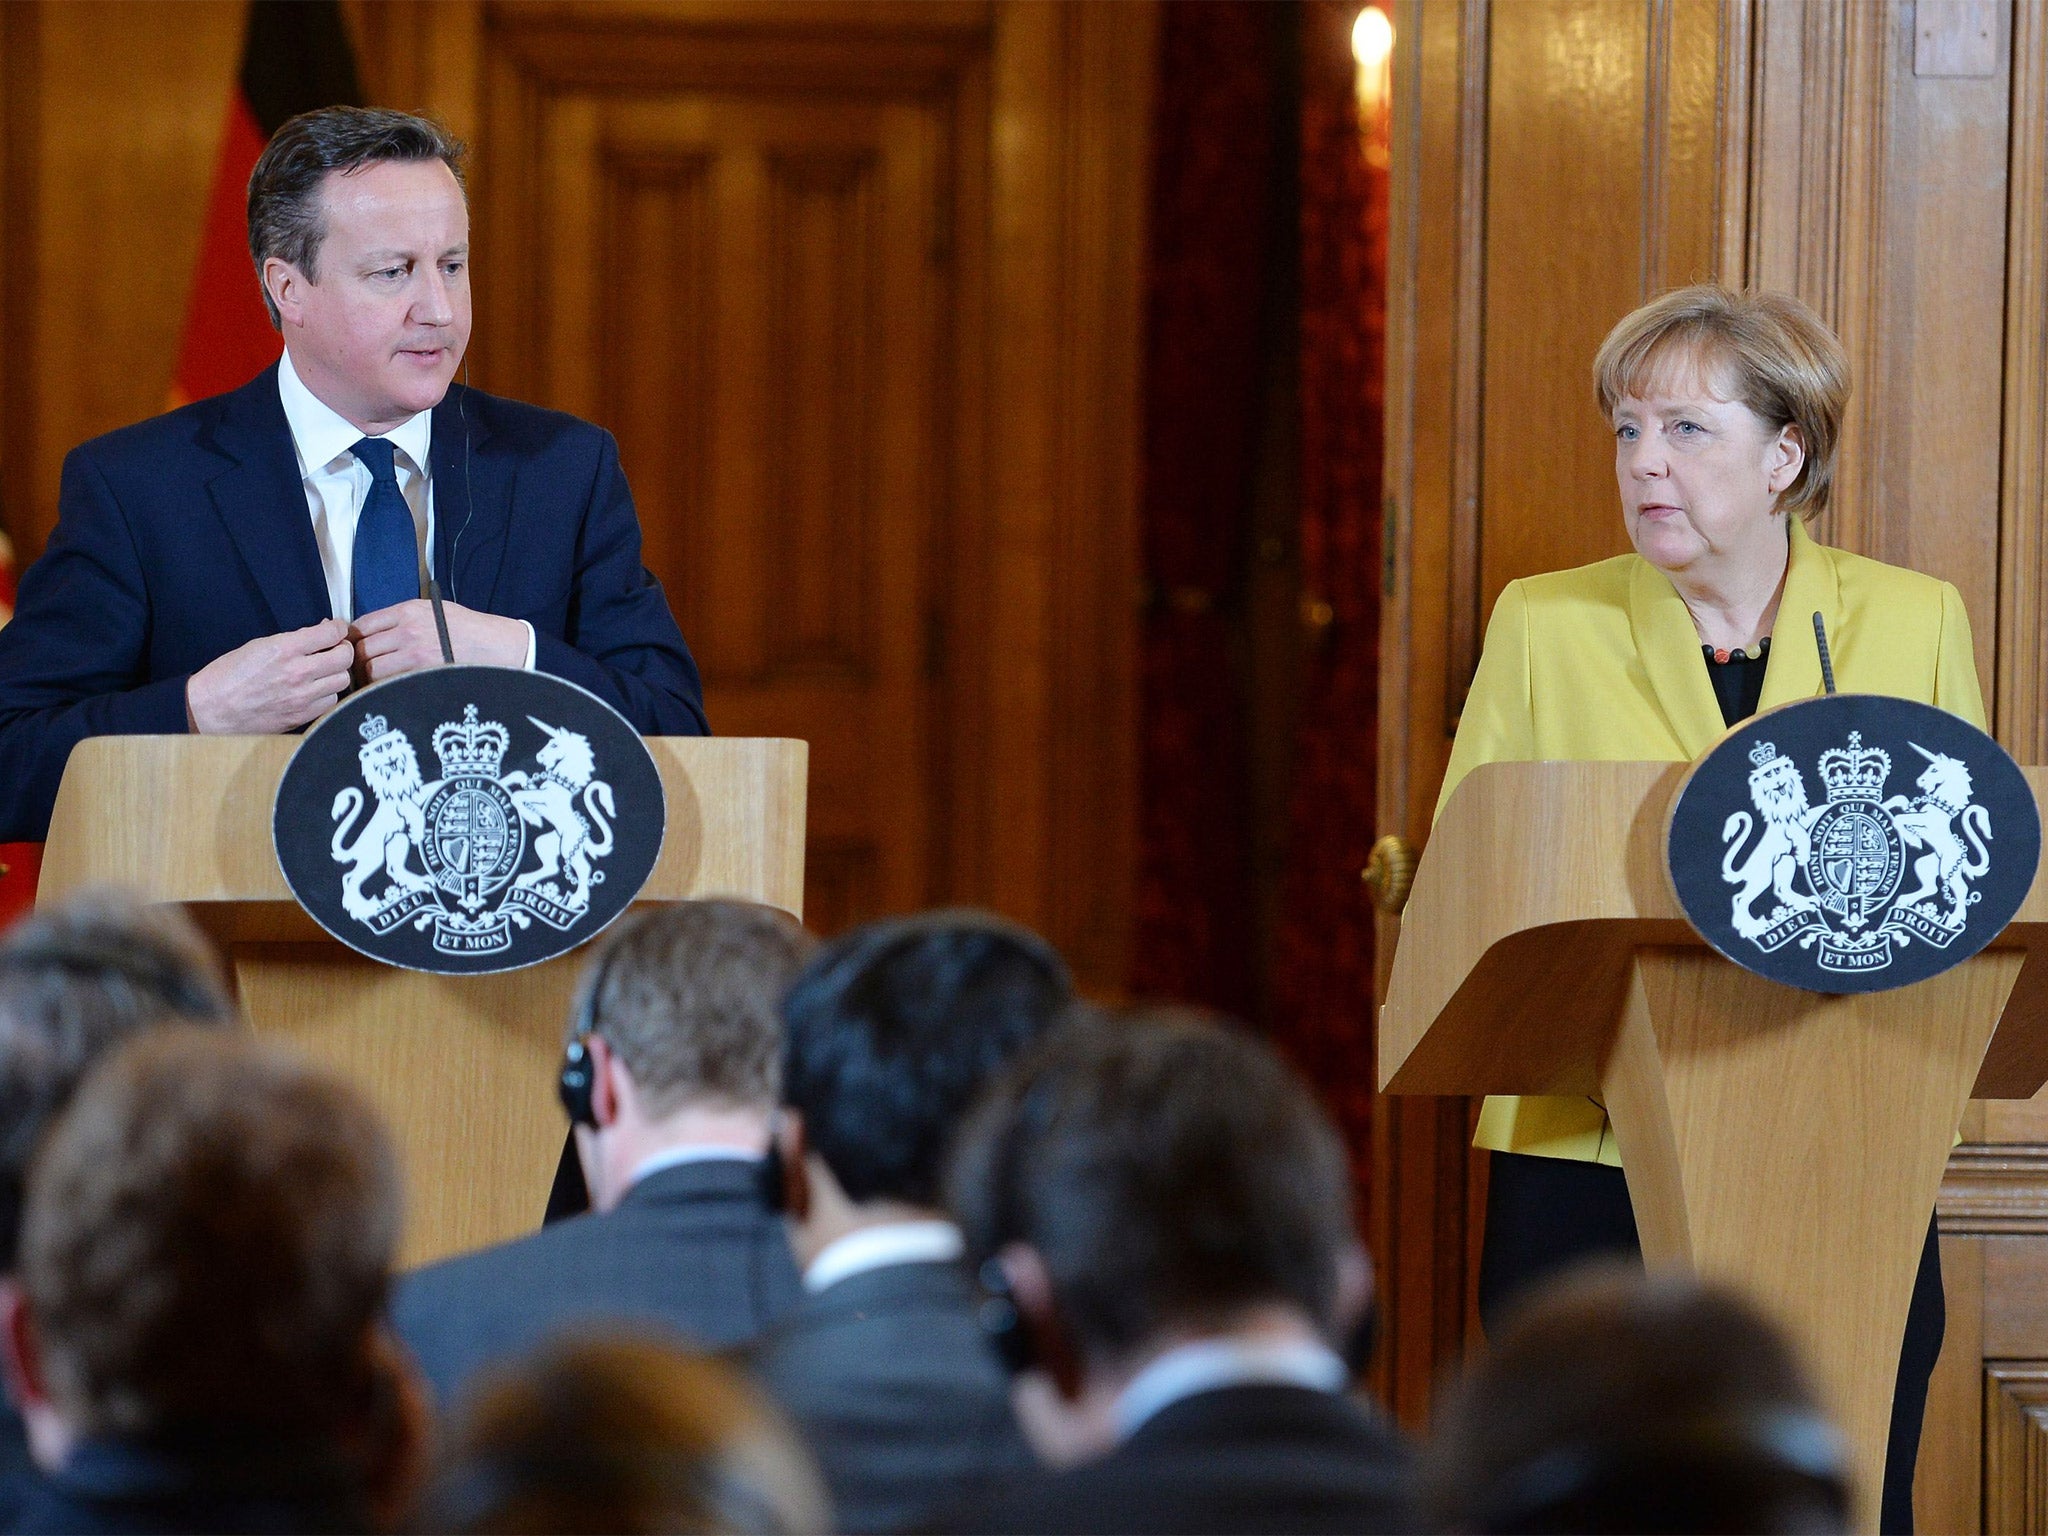 Prime Minister David Cameron and German Chancellor Angela Merkel hold a joint press conference inside 10 Downing Street 